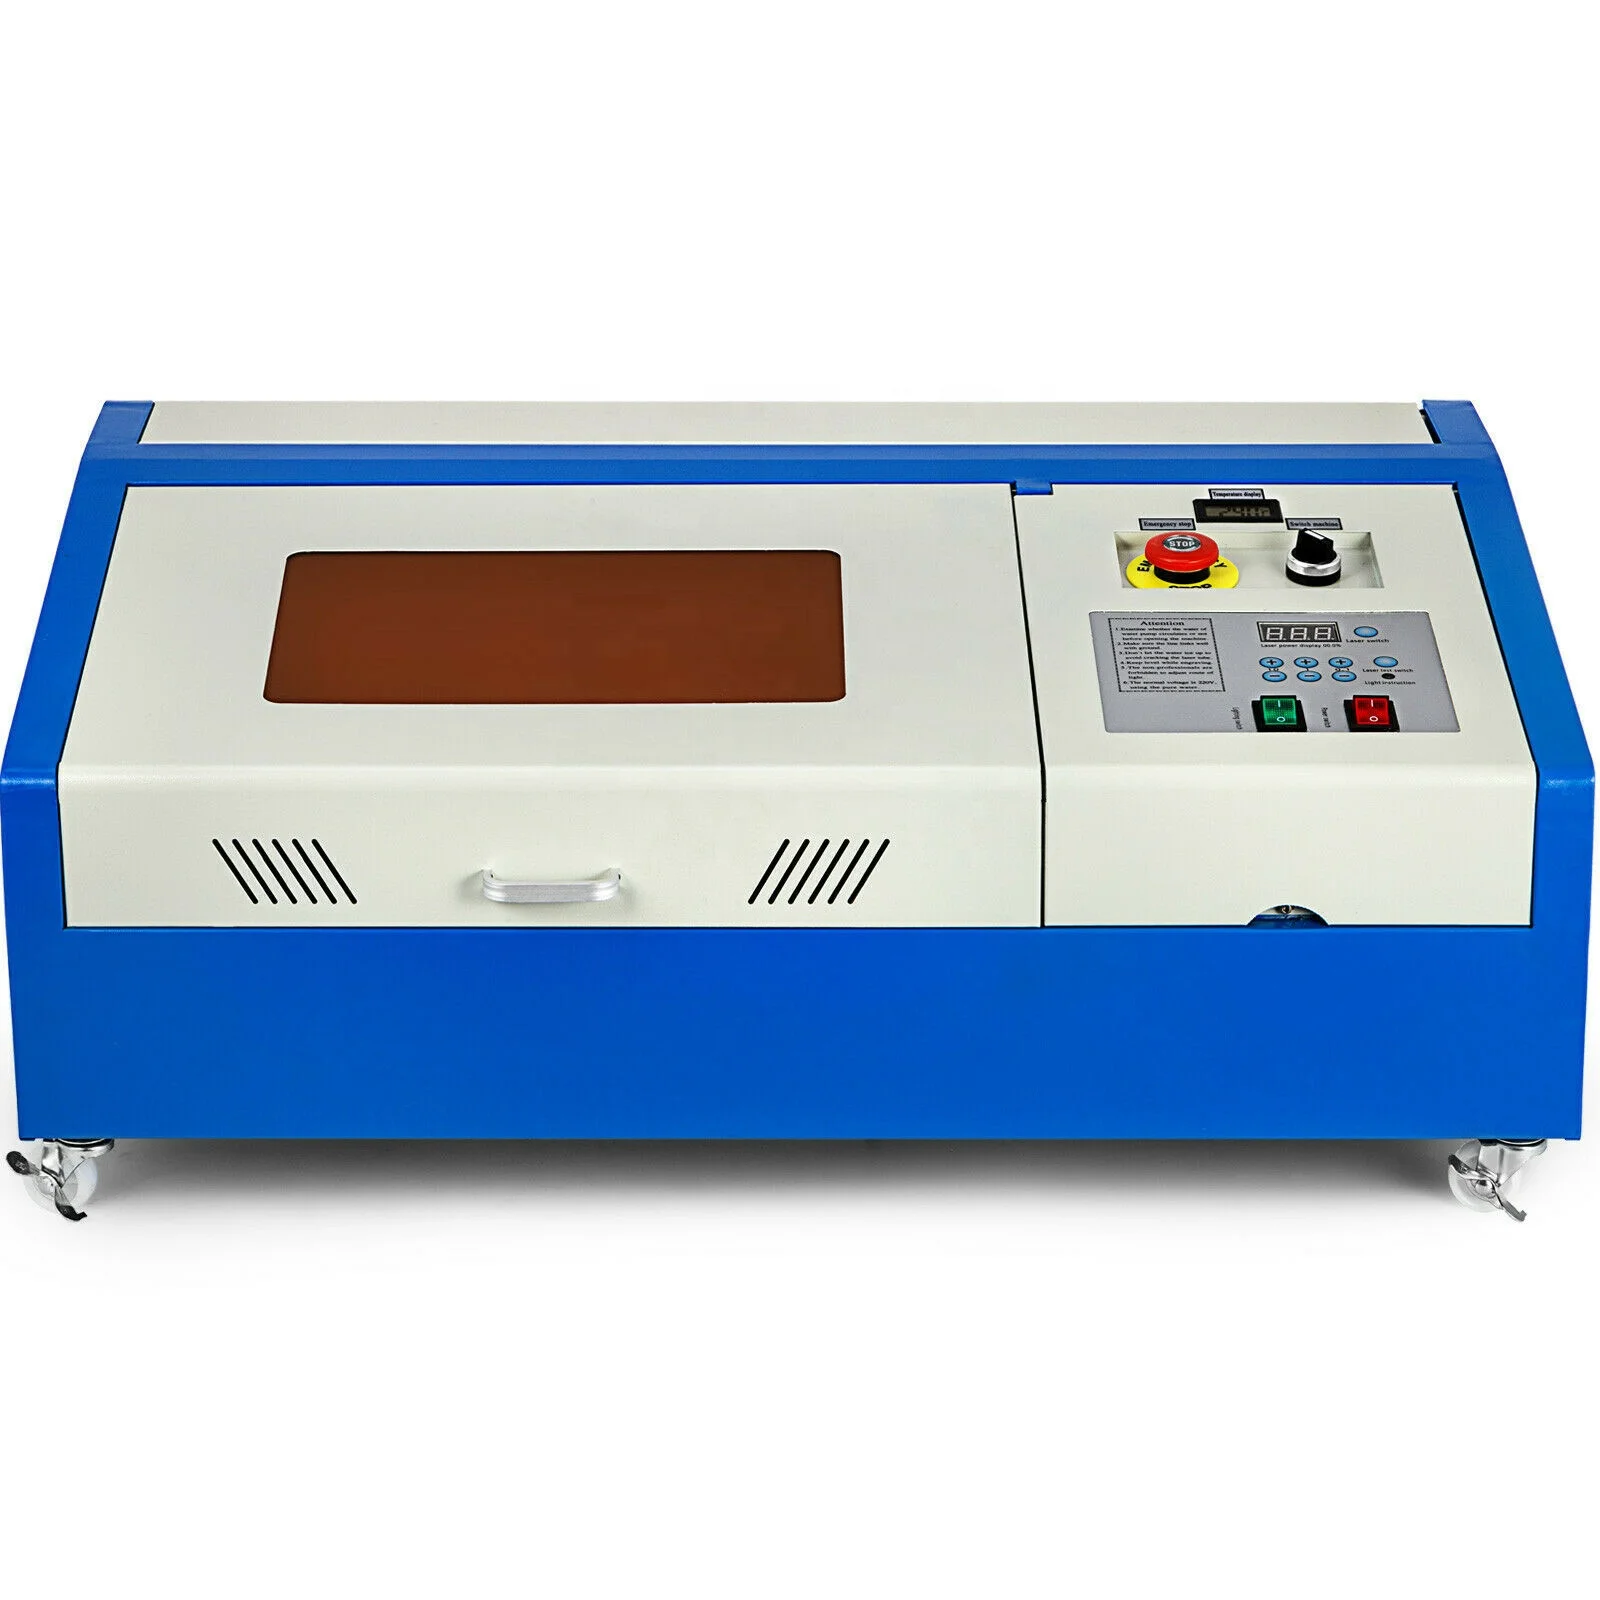 Upgraded 40W USB CO2 Laser Engraver Engraving Cutting Machine Cutter K40 with LCD Display Rotate Wheels